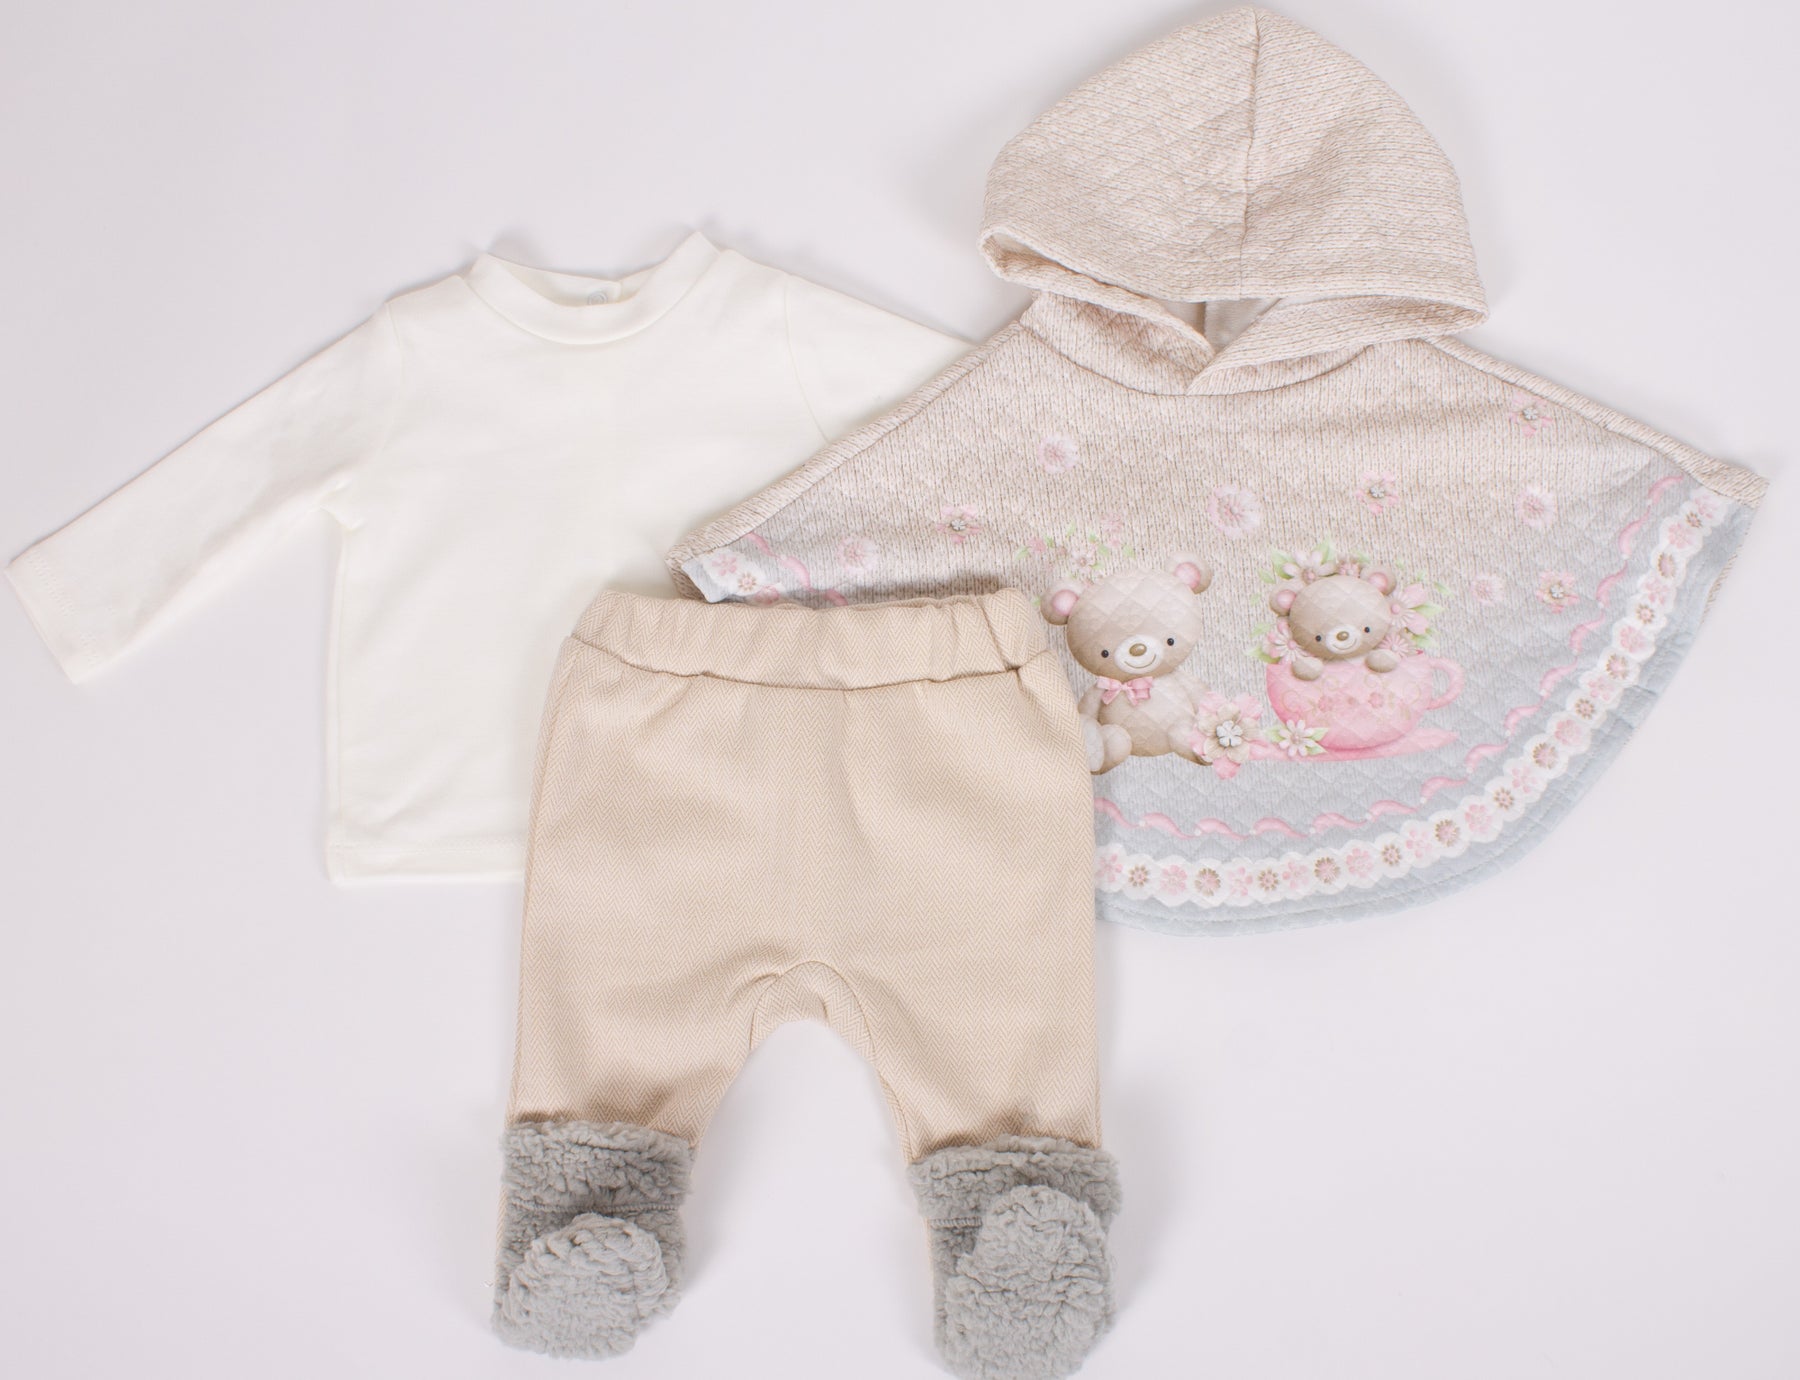 Elma's Clothing offers the best baby and children's products.